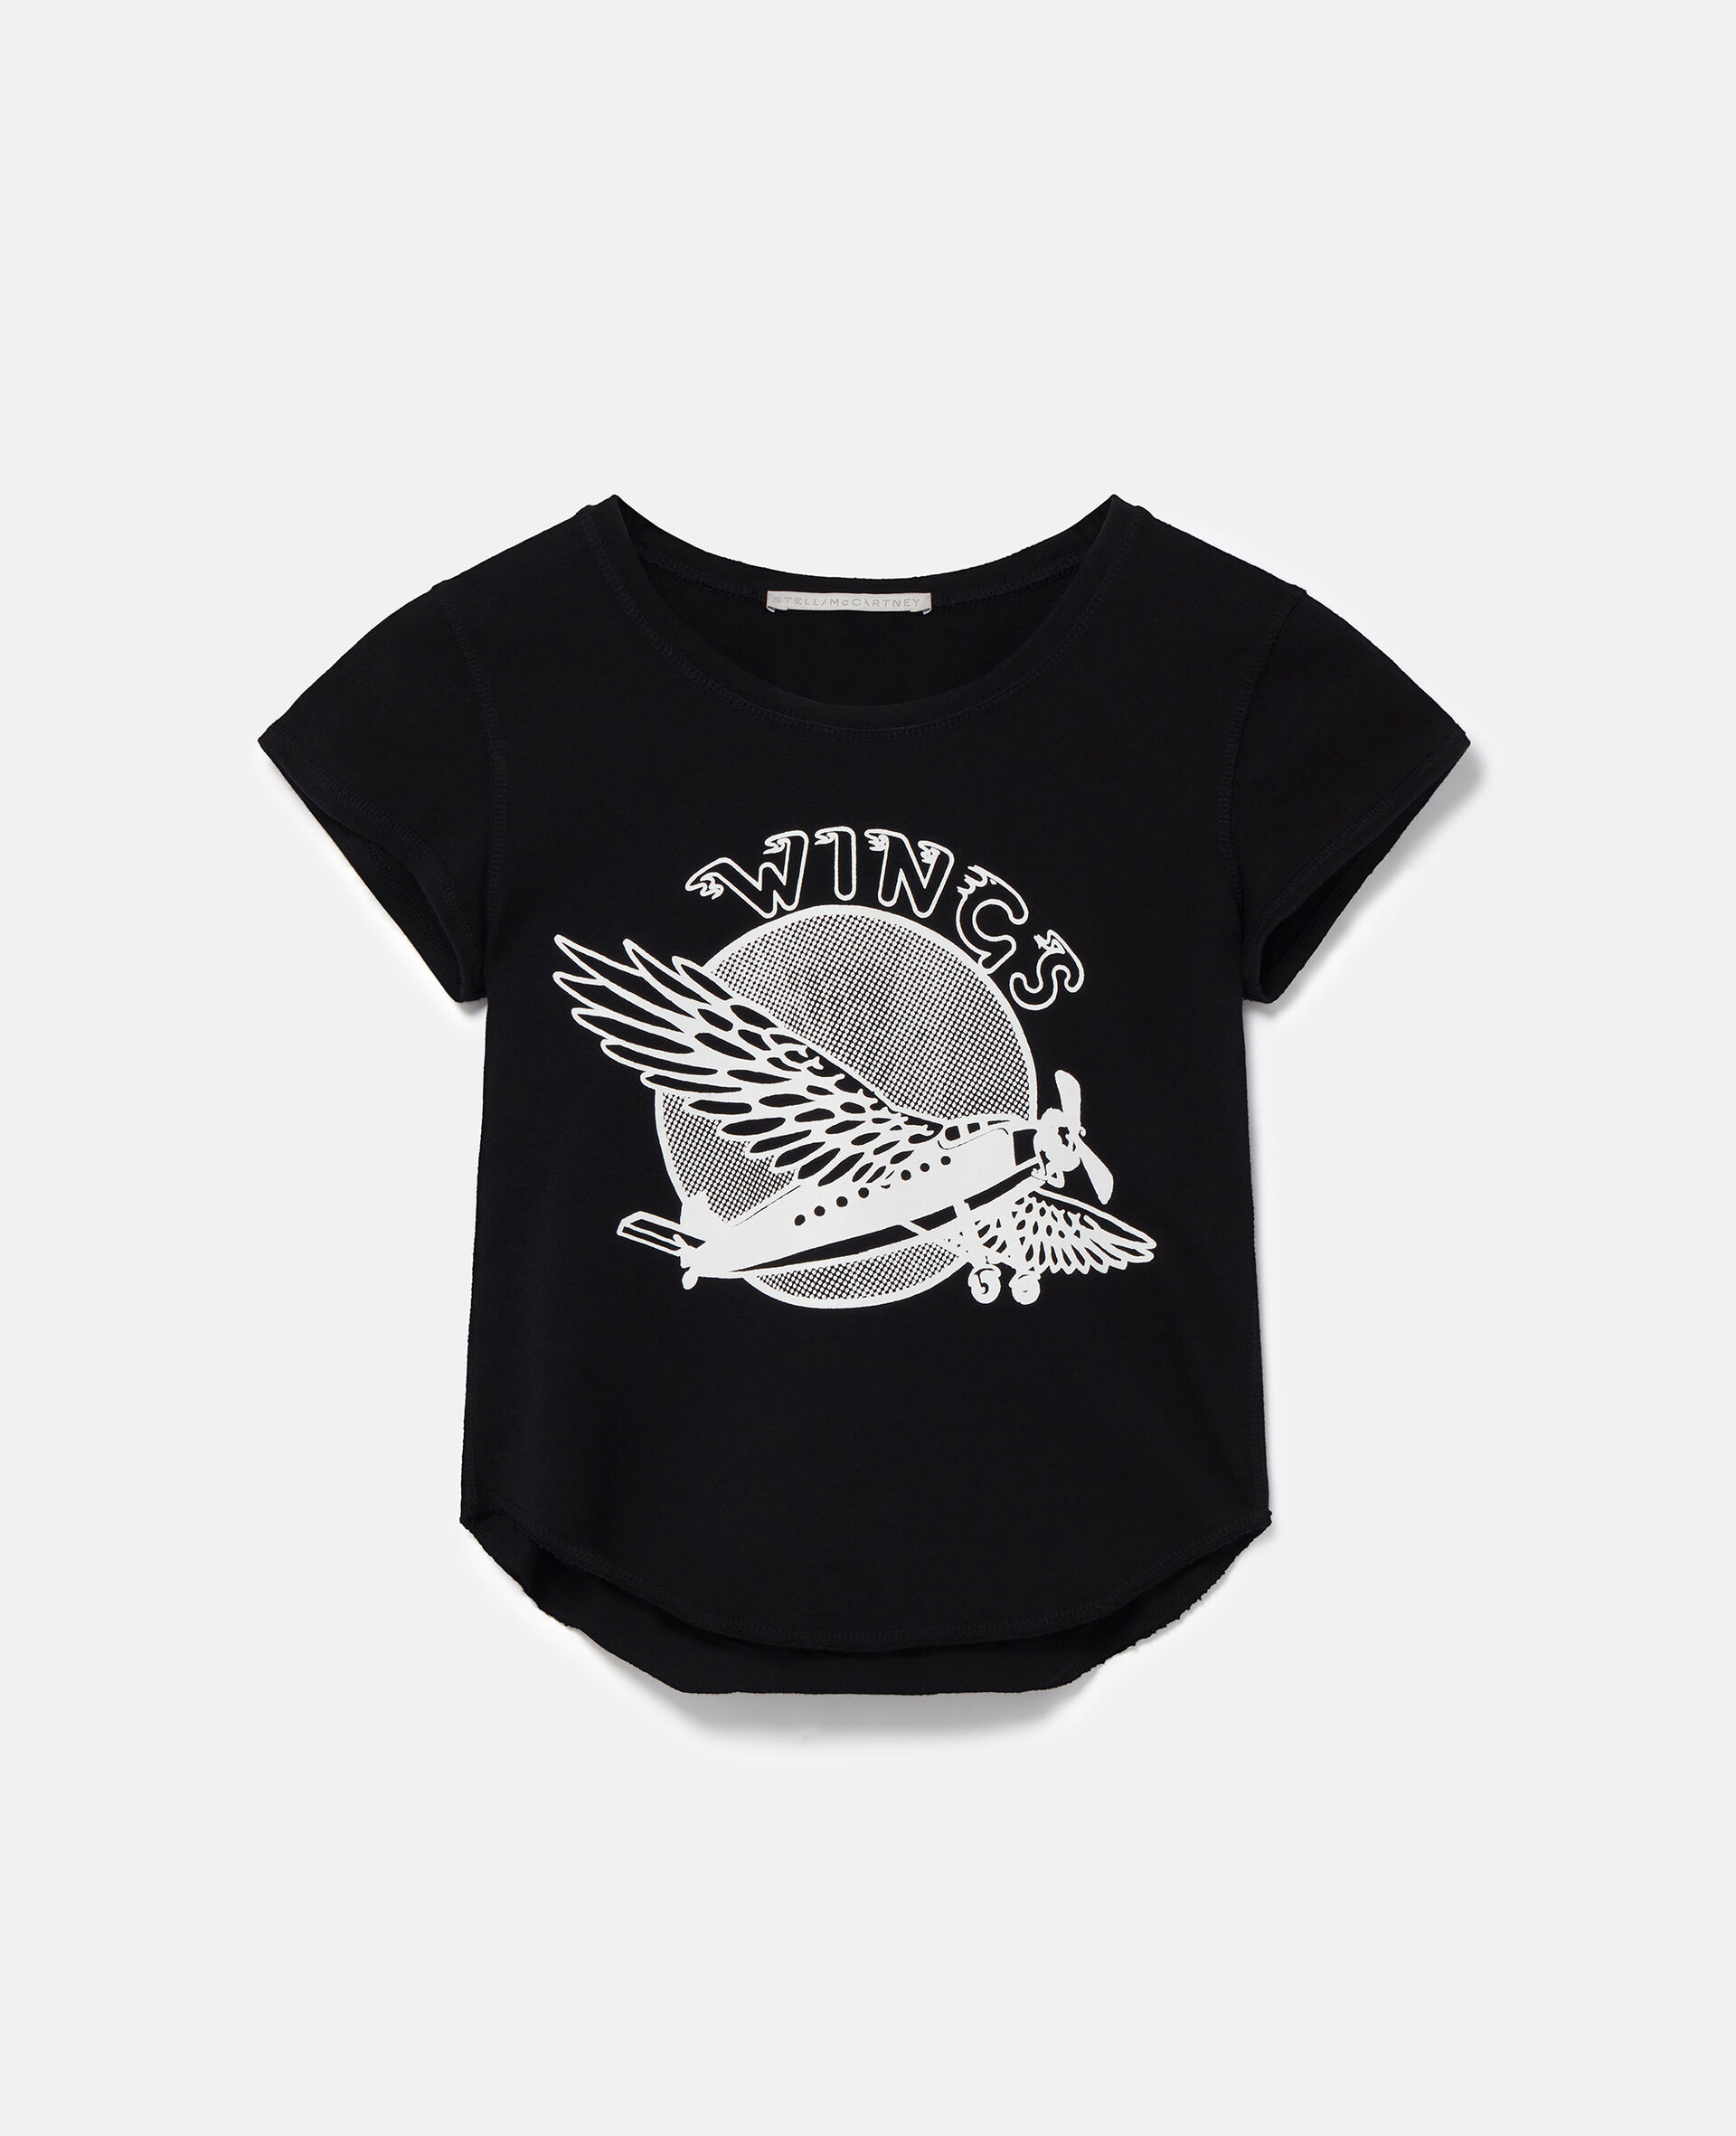 Wings Graphic Cotton Baby Tee-Black-large image number 0